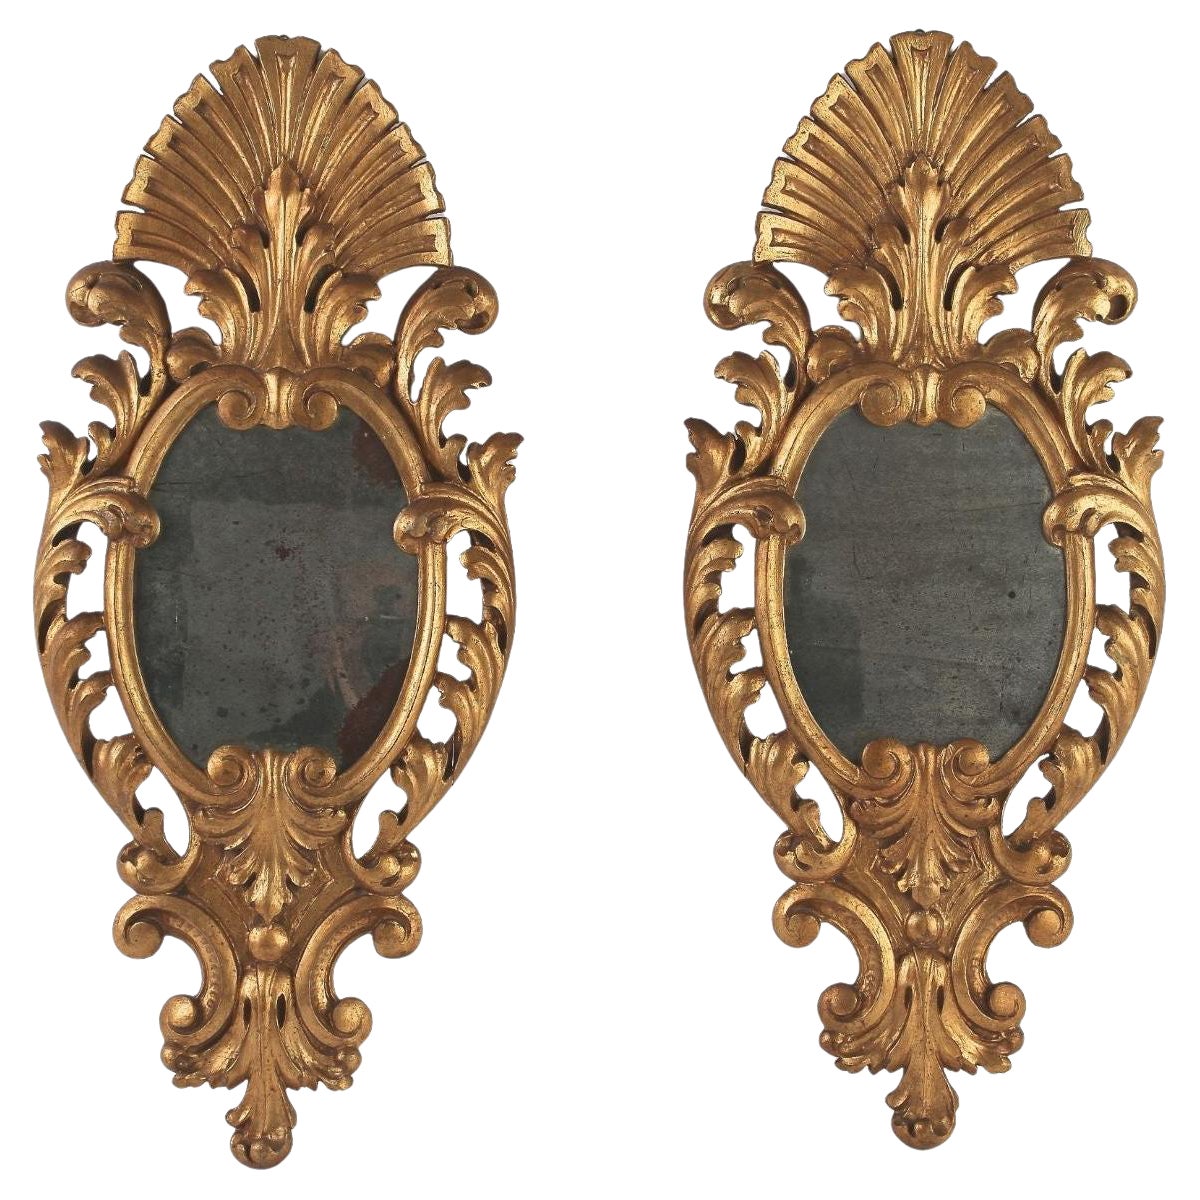 Pair of 19th Century Hand Carved Gilt Wall Mirrors, Italy, Ca. 1850